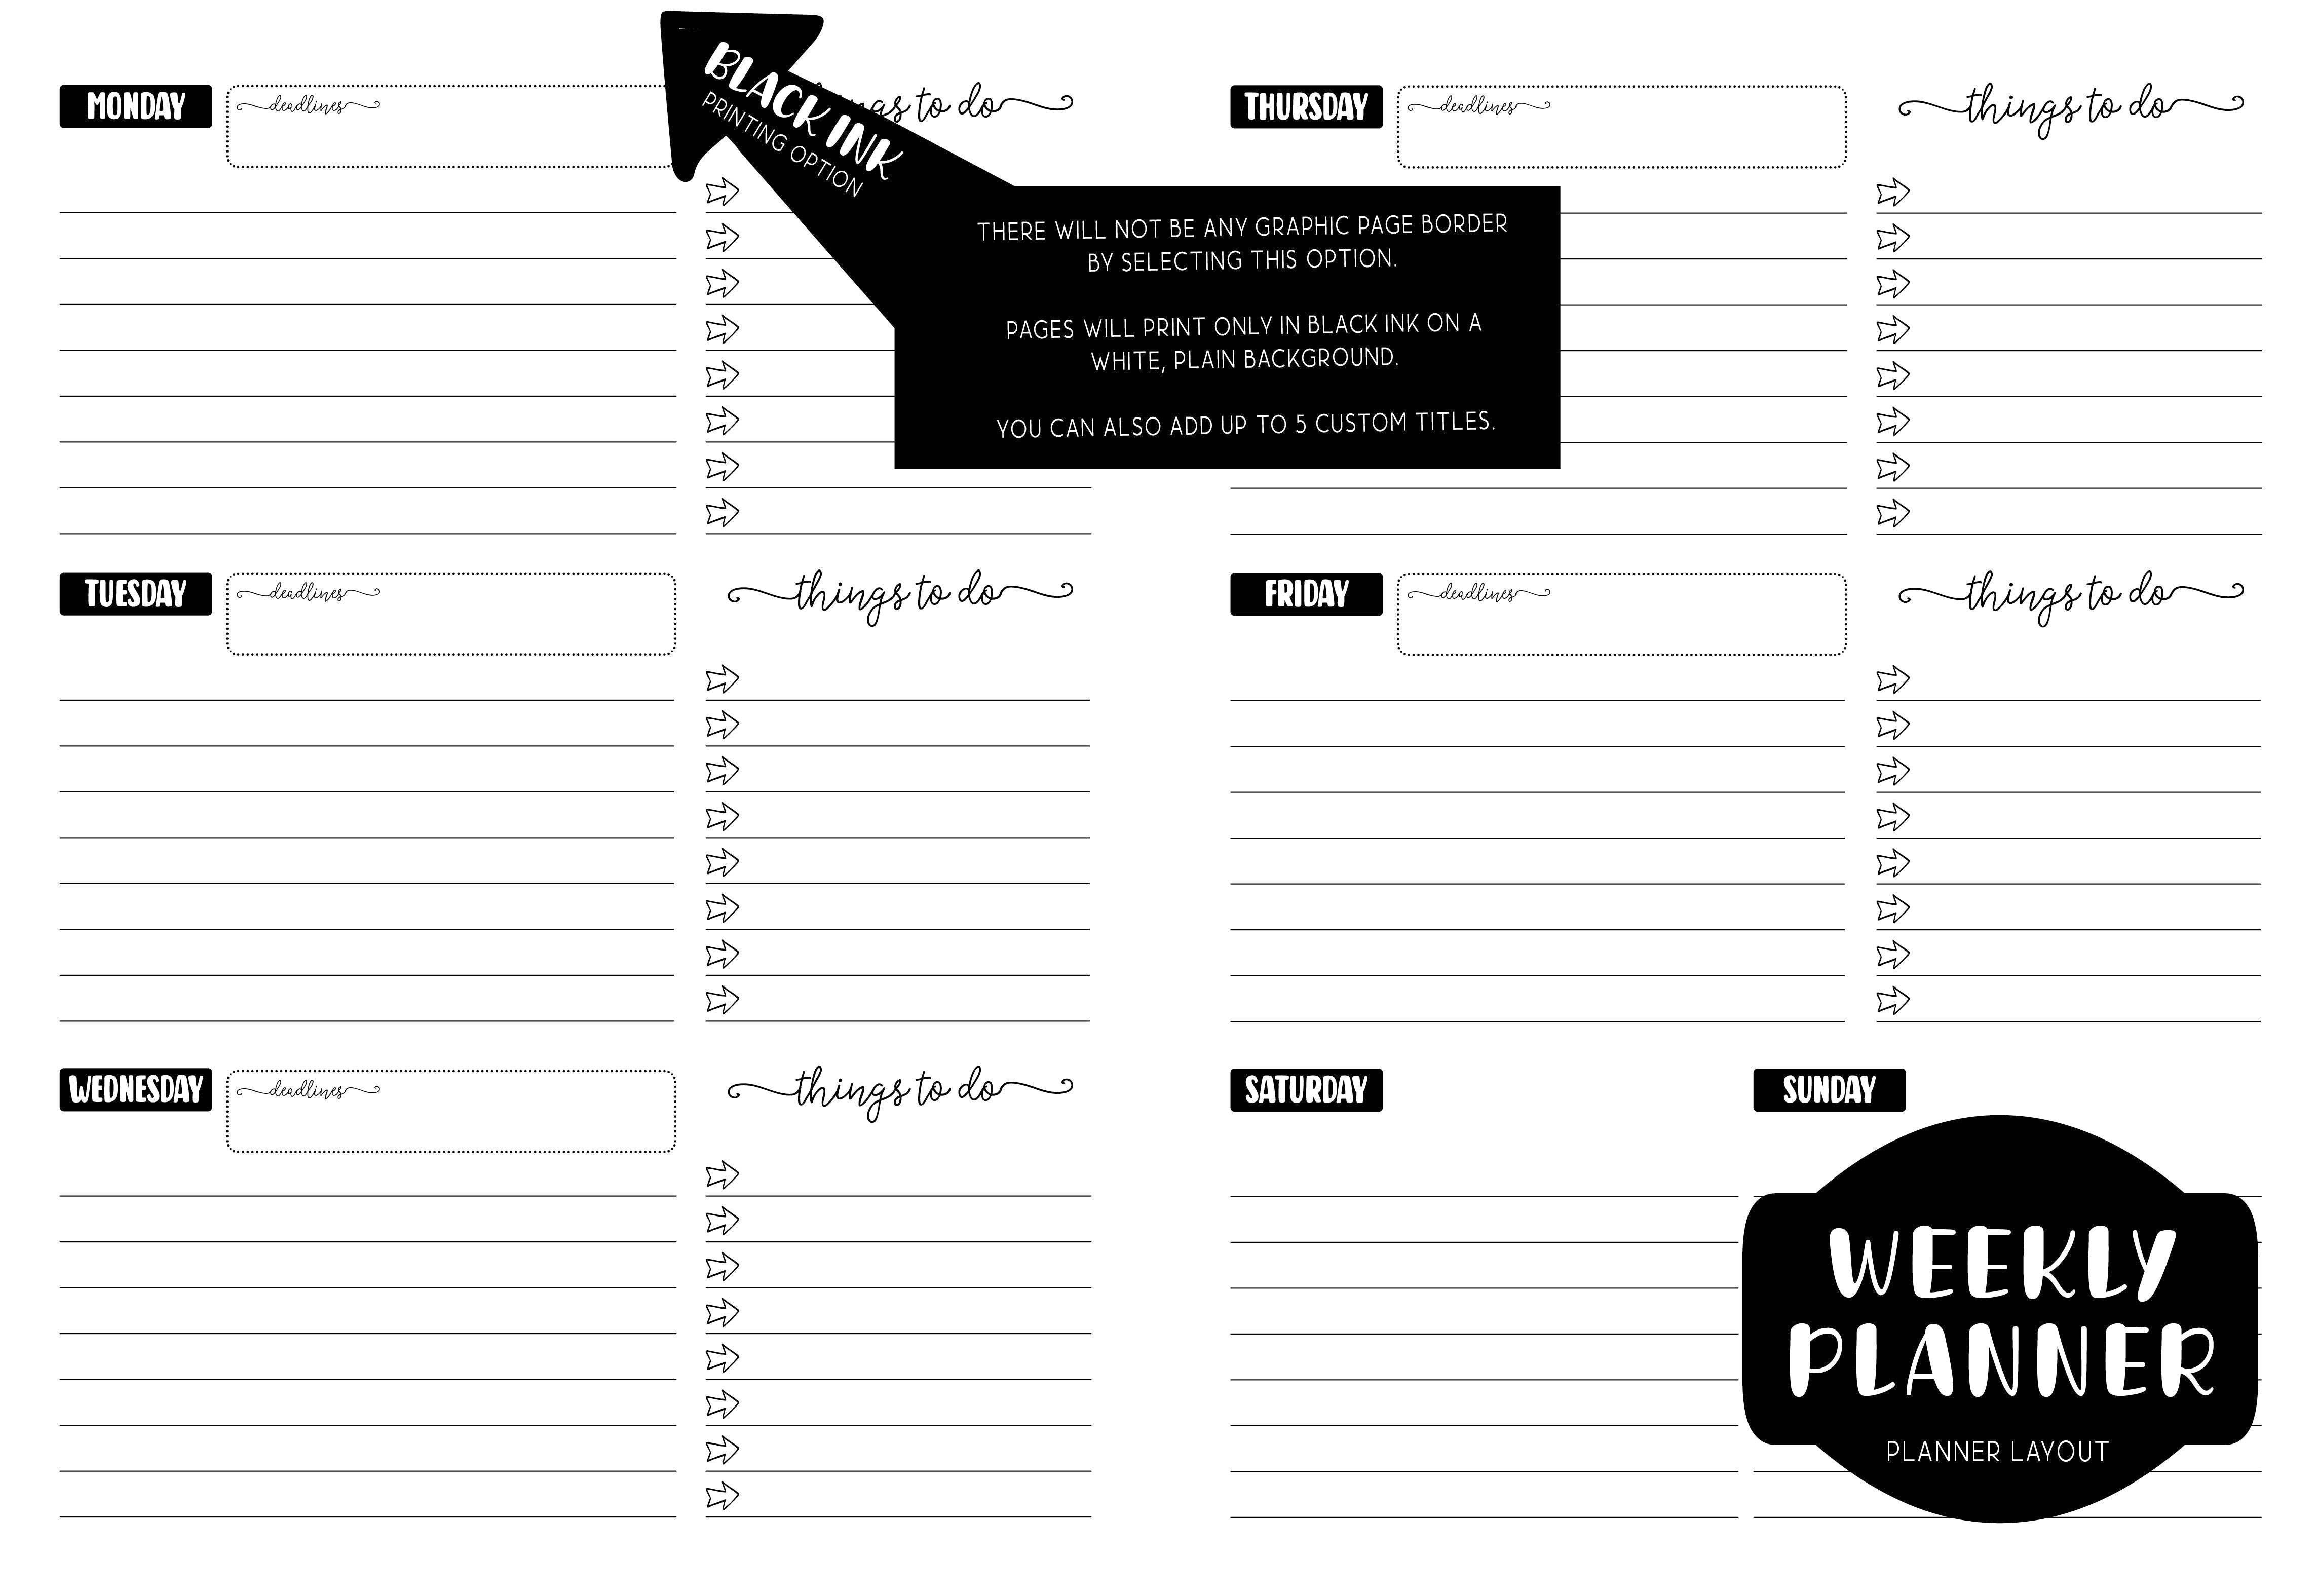 Weekly Planner - BOBBY PIN